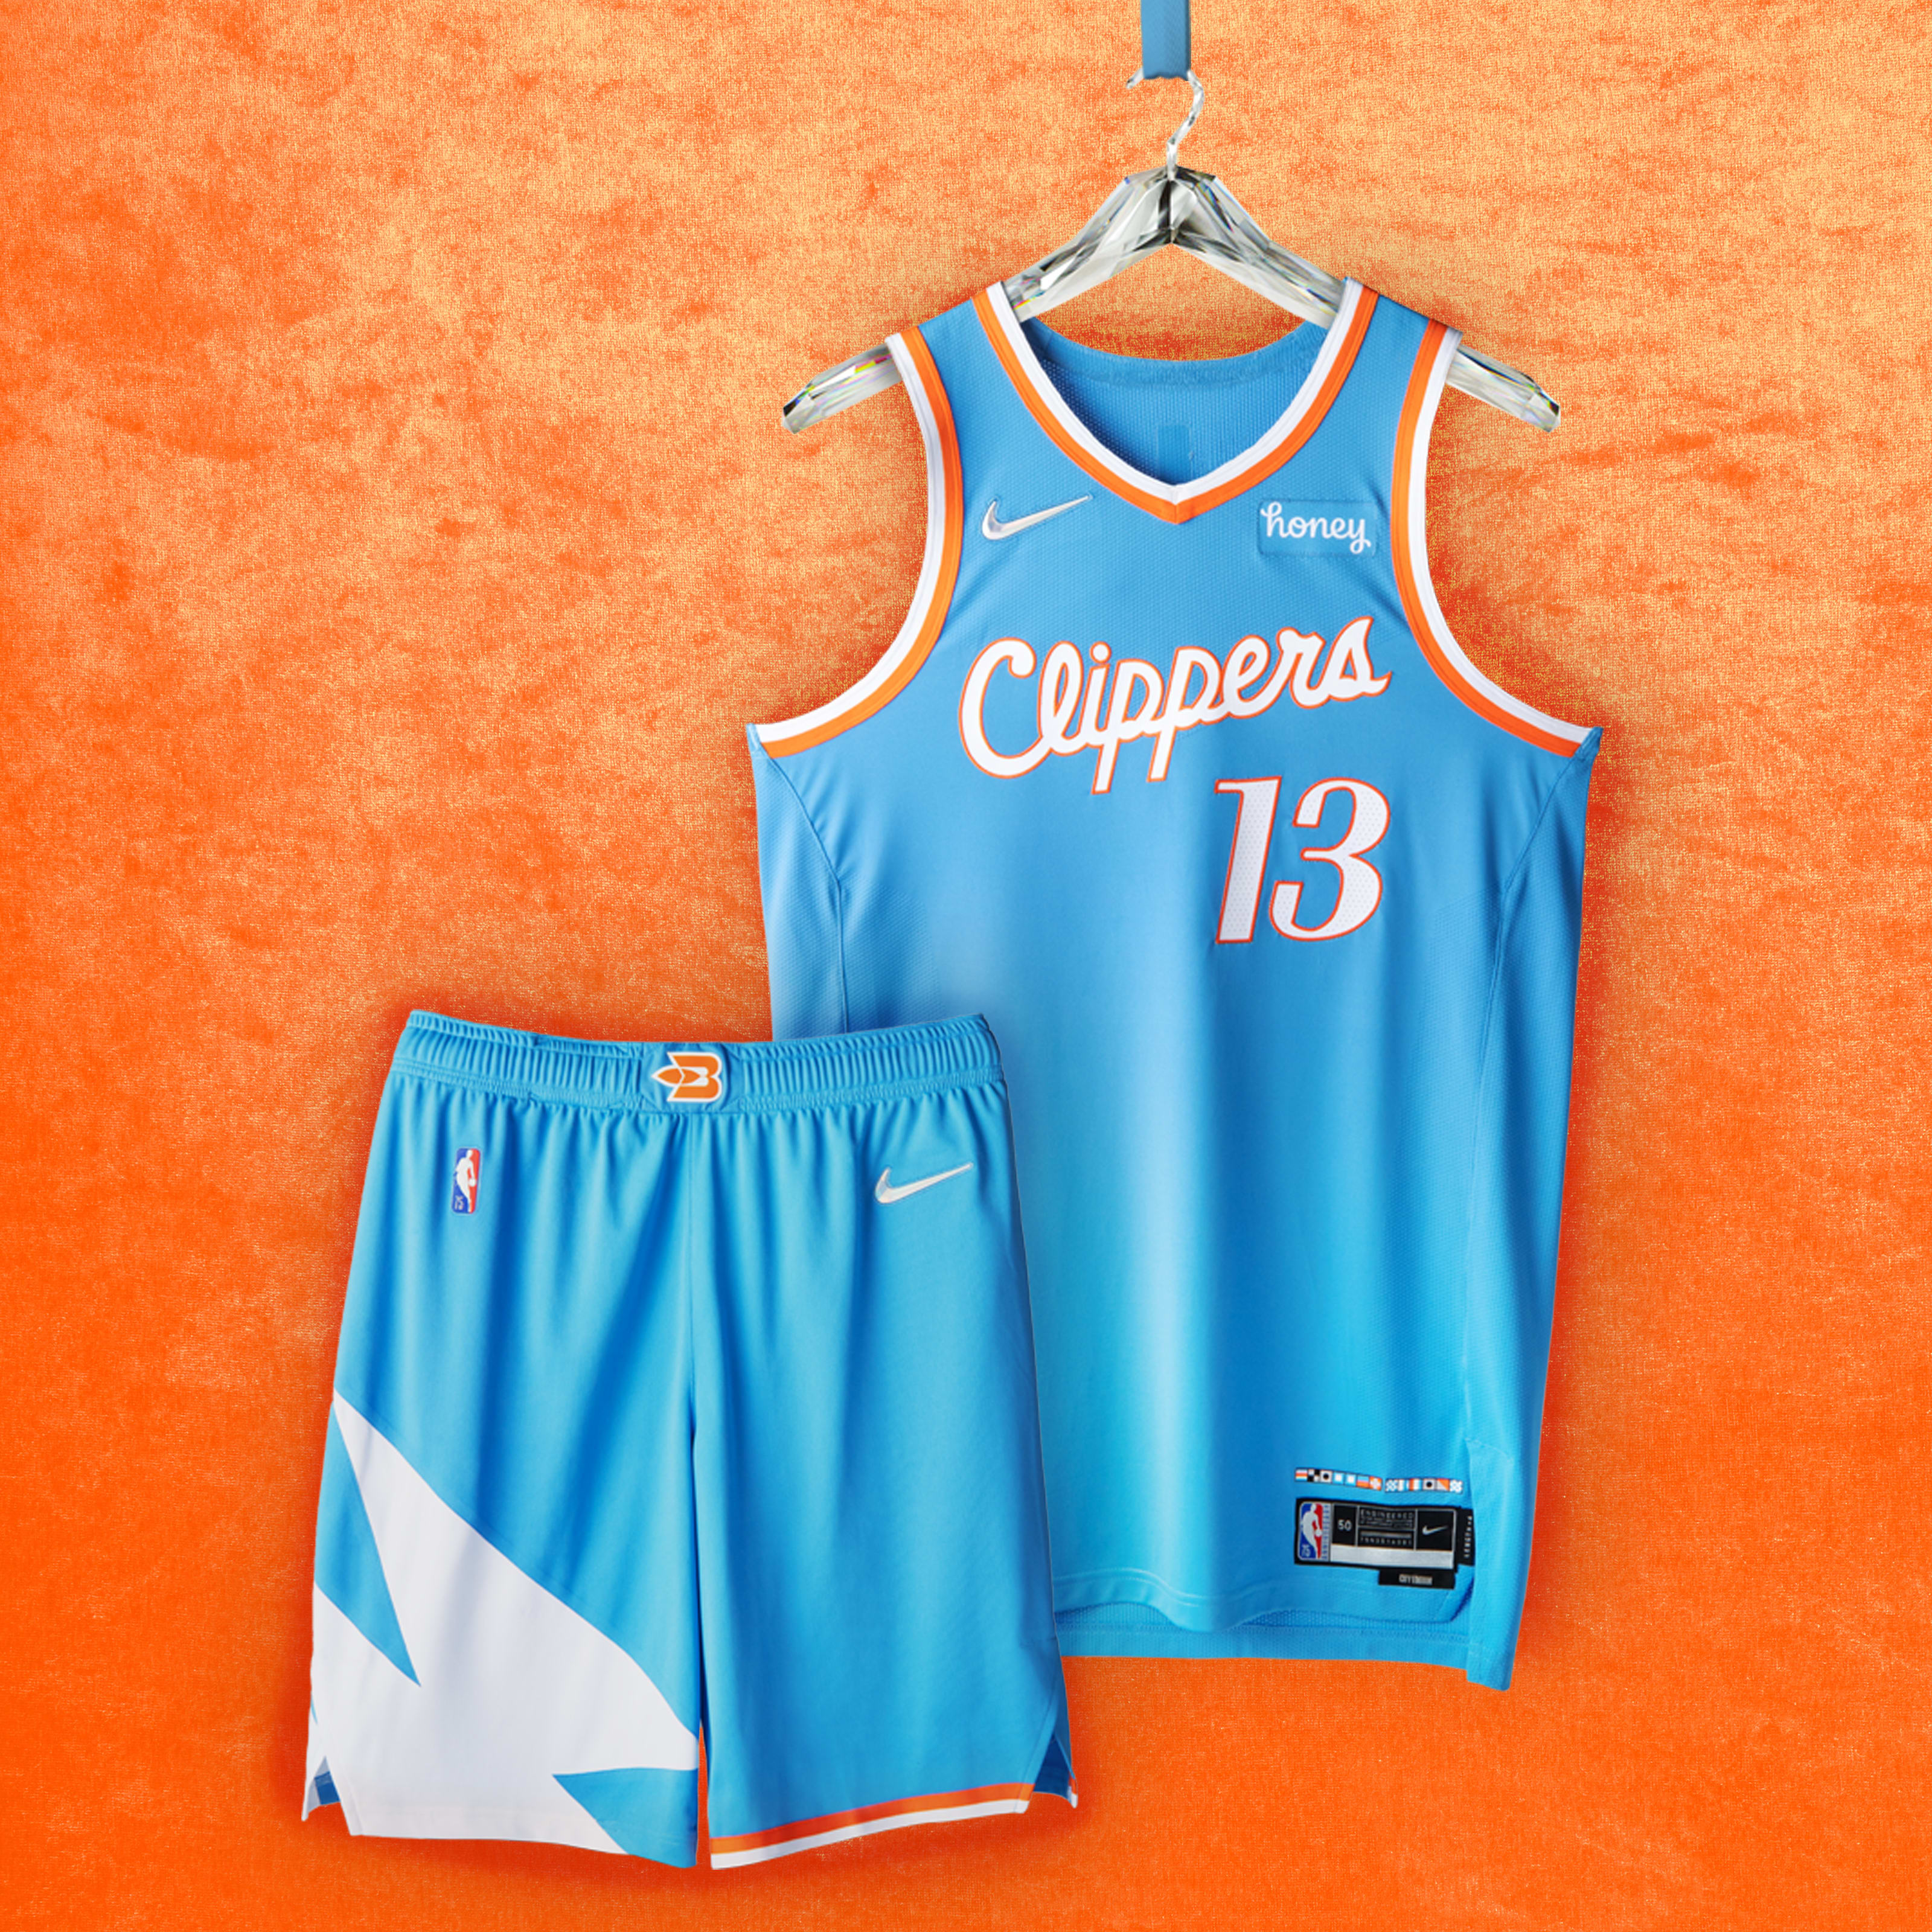 Order your Los Angeles Clippers Nike City Edition gear today